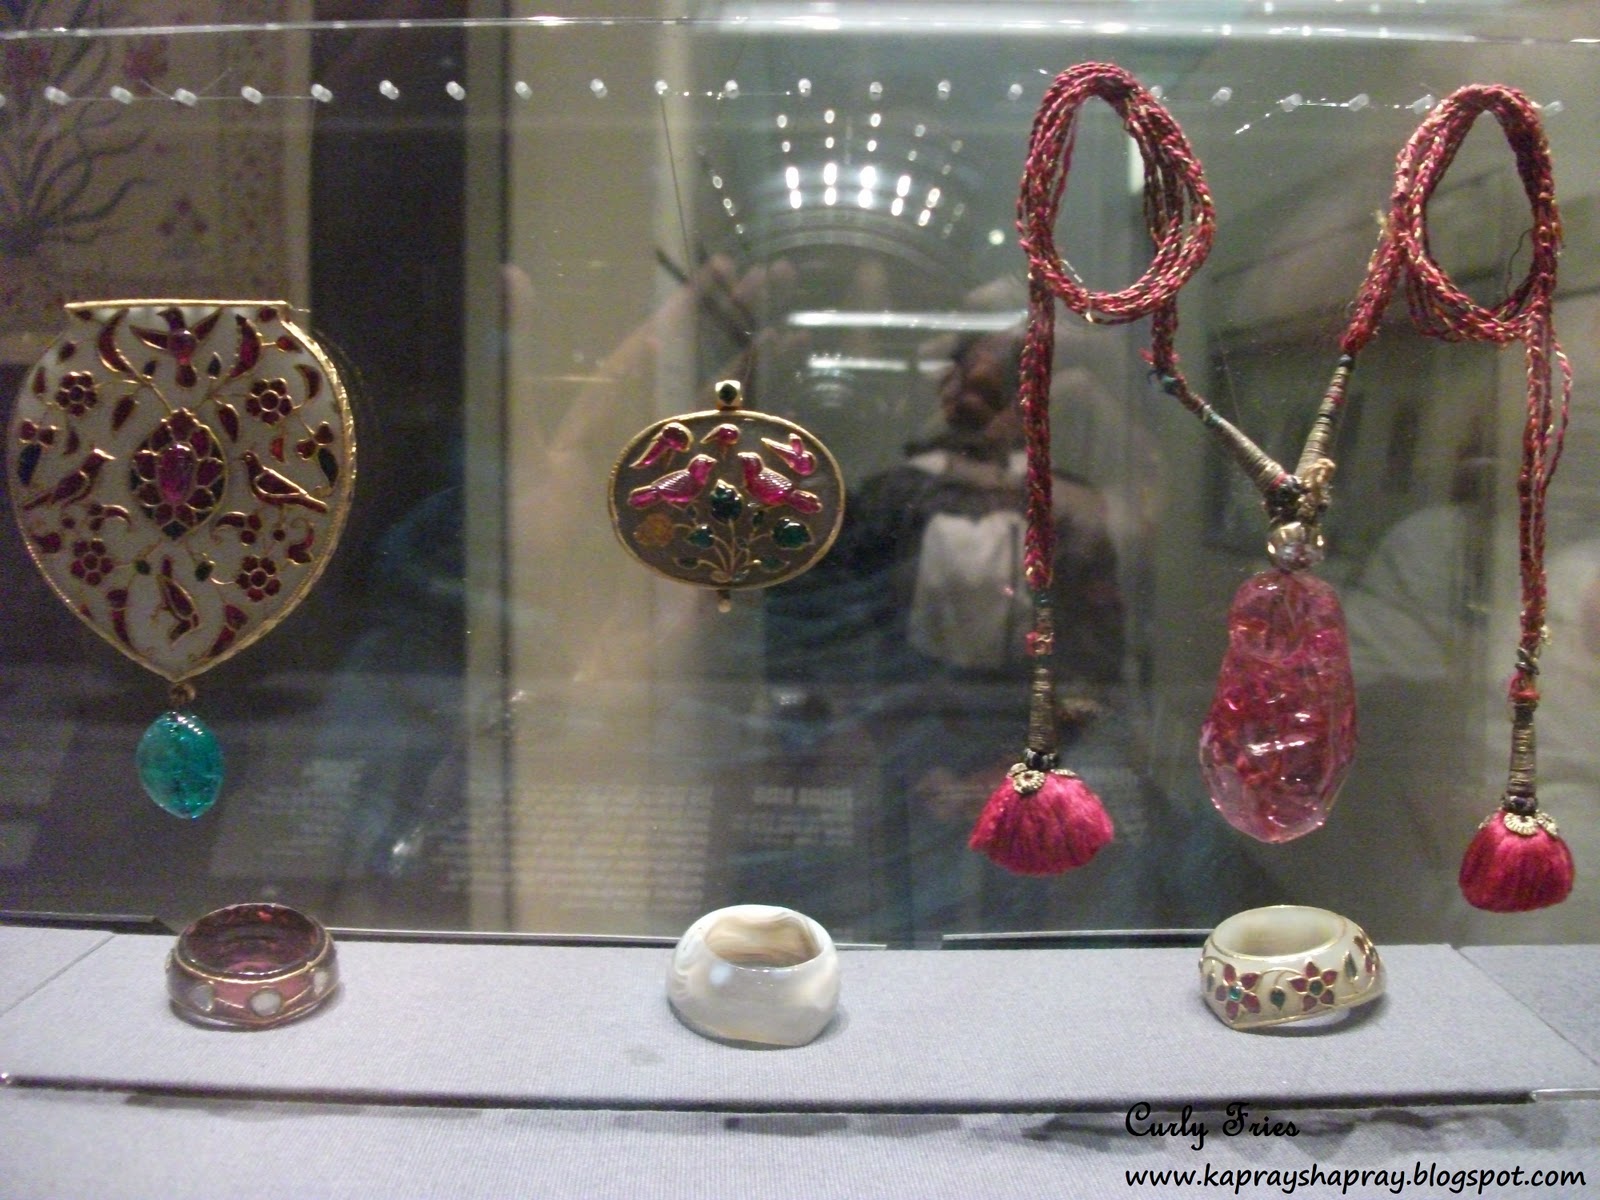 Fashion Point: Antique Ornaments and Jewellery at the V&A Museum